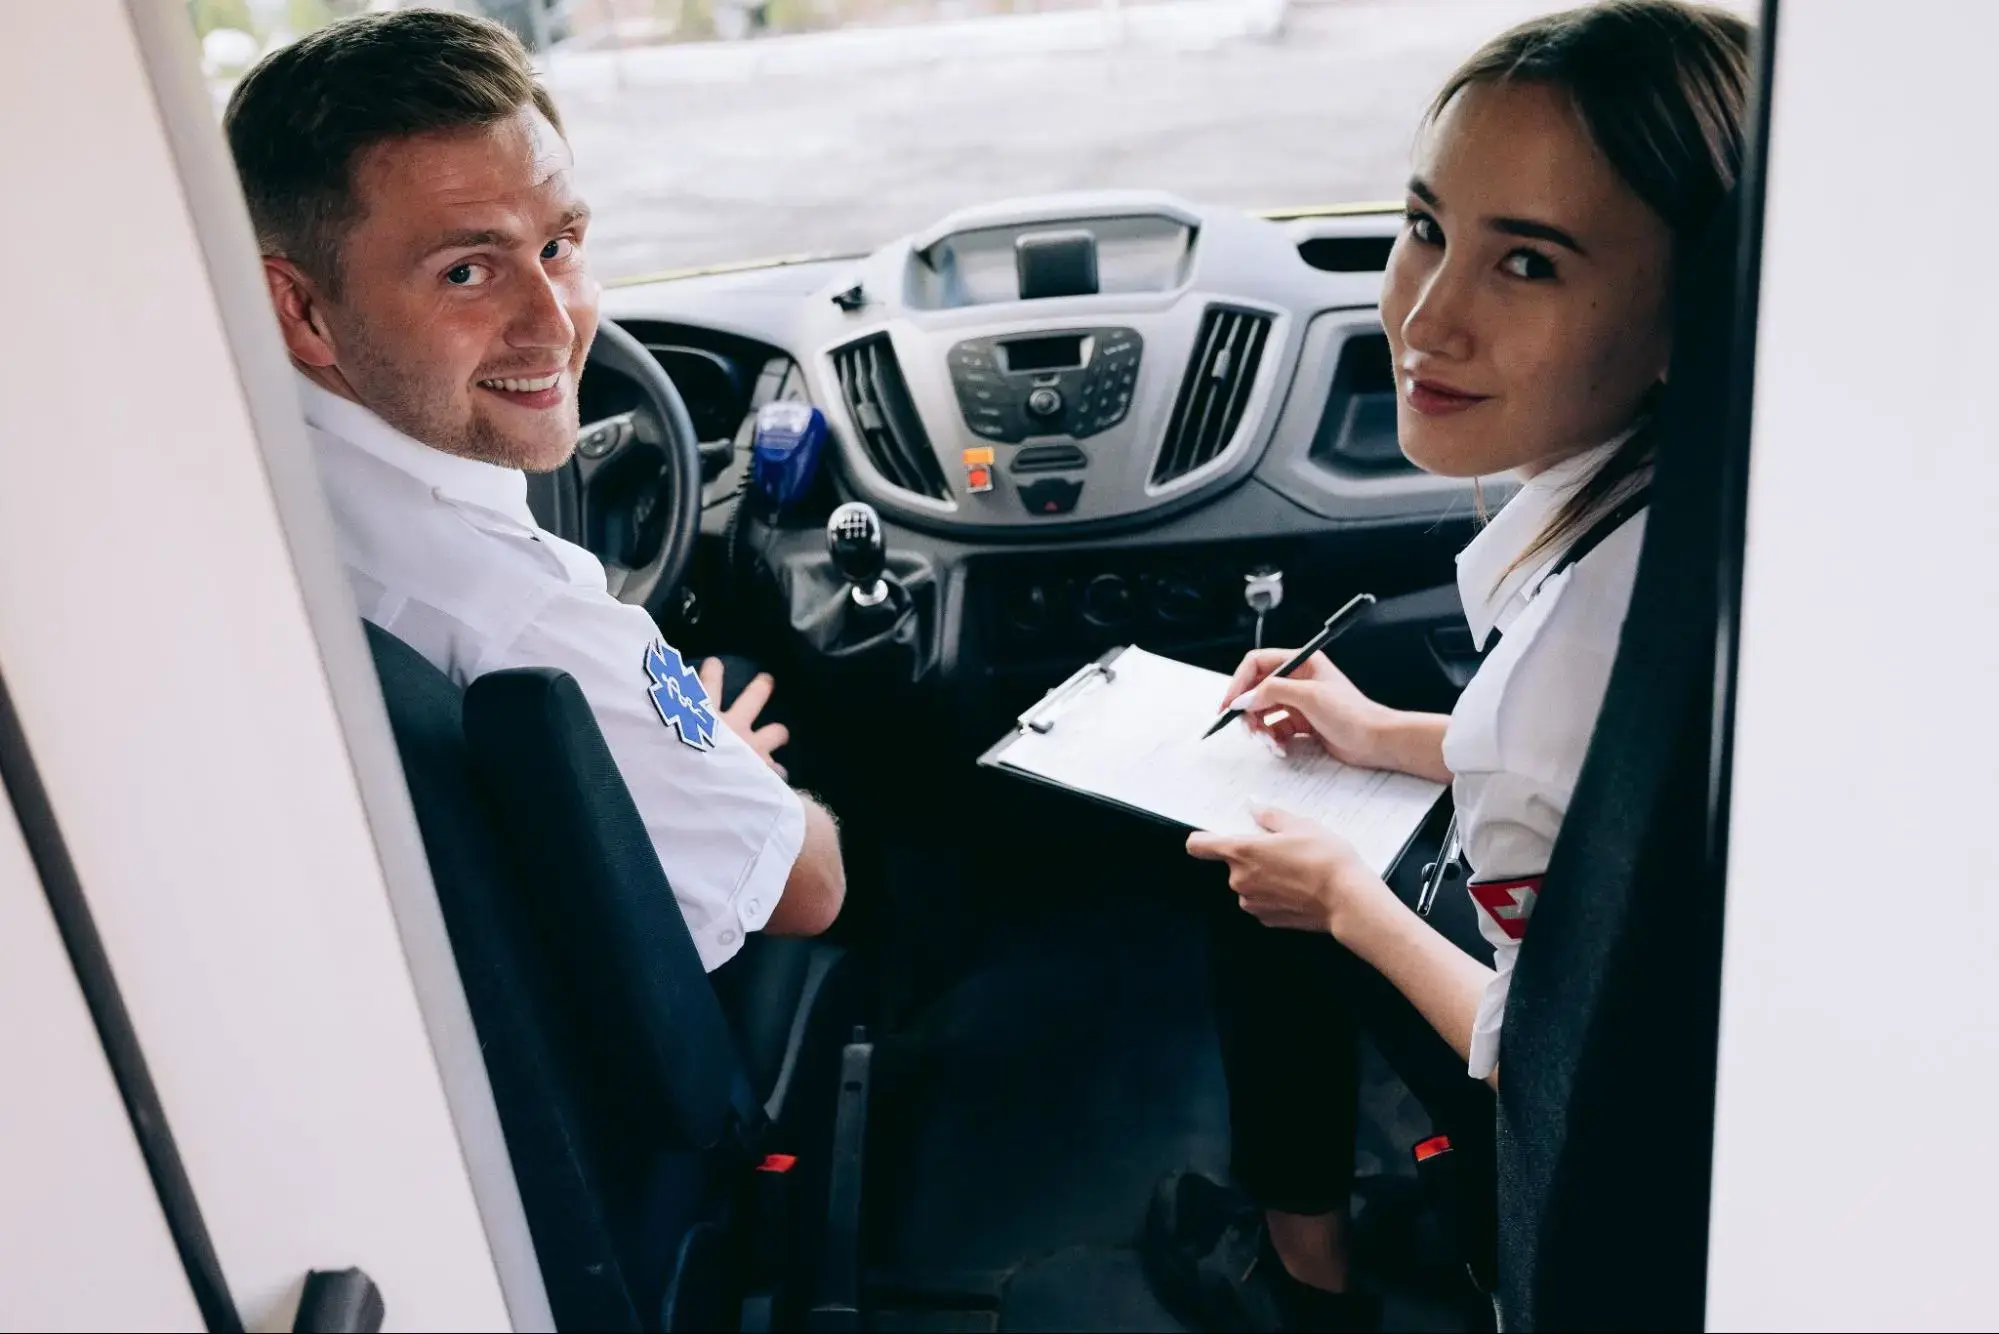 Healthcare Professionals in an Ambulance taking a patient to their medical appointment